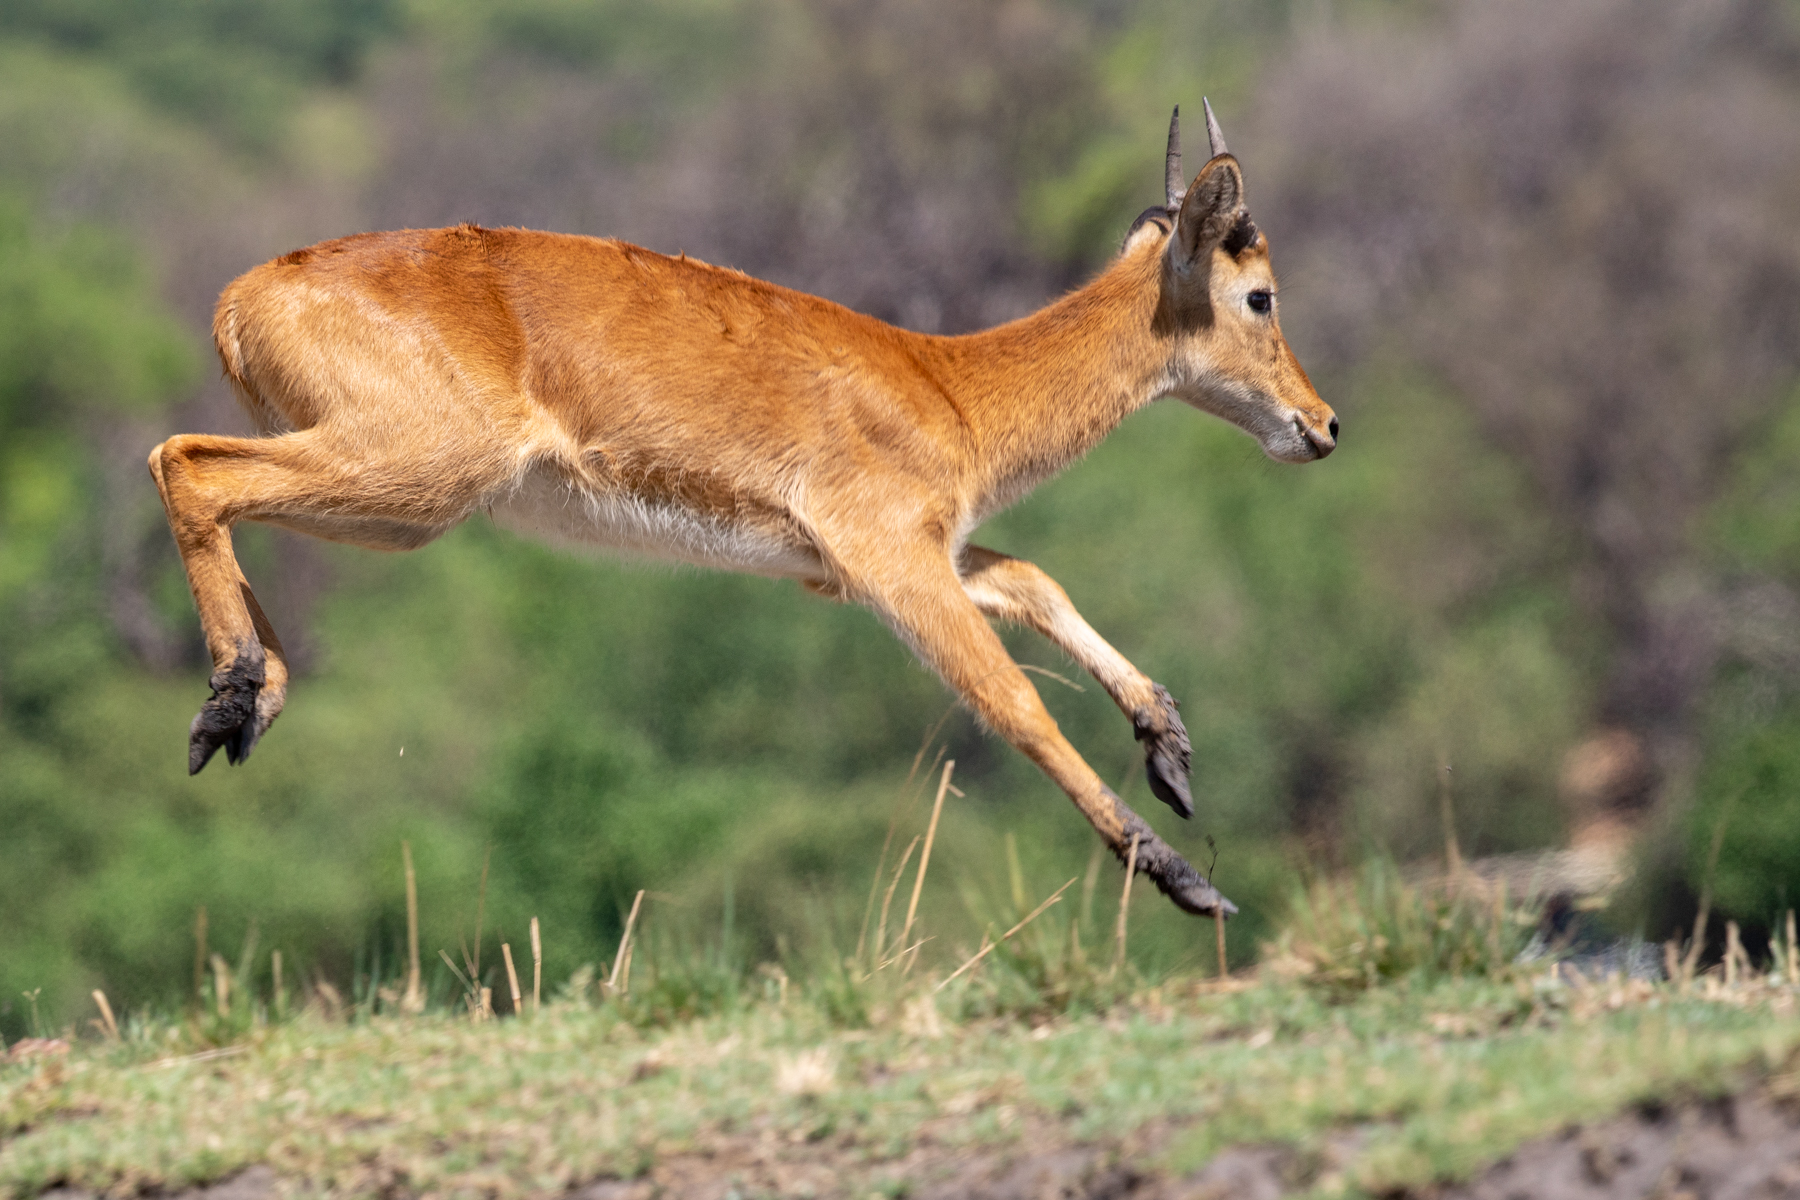 The Puku is an uncommon, restricted-range antelope of flood plains in Botswana and some neighbouring countries